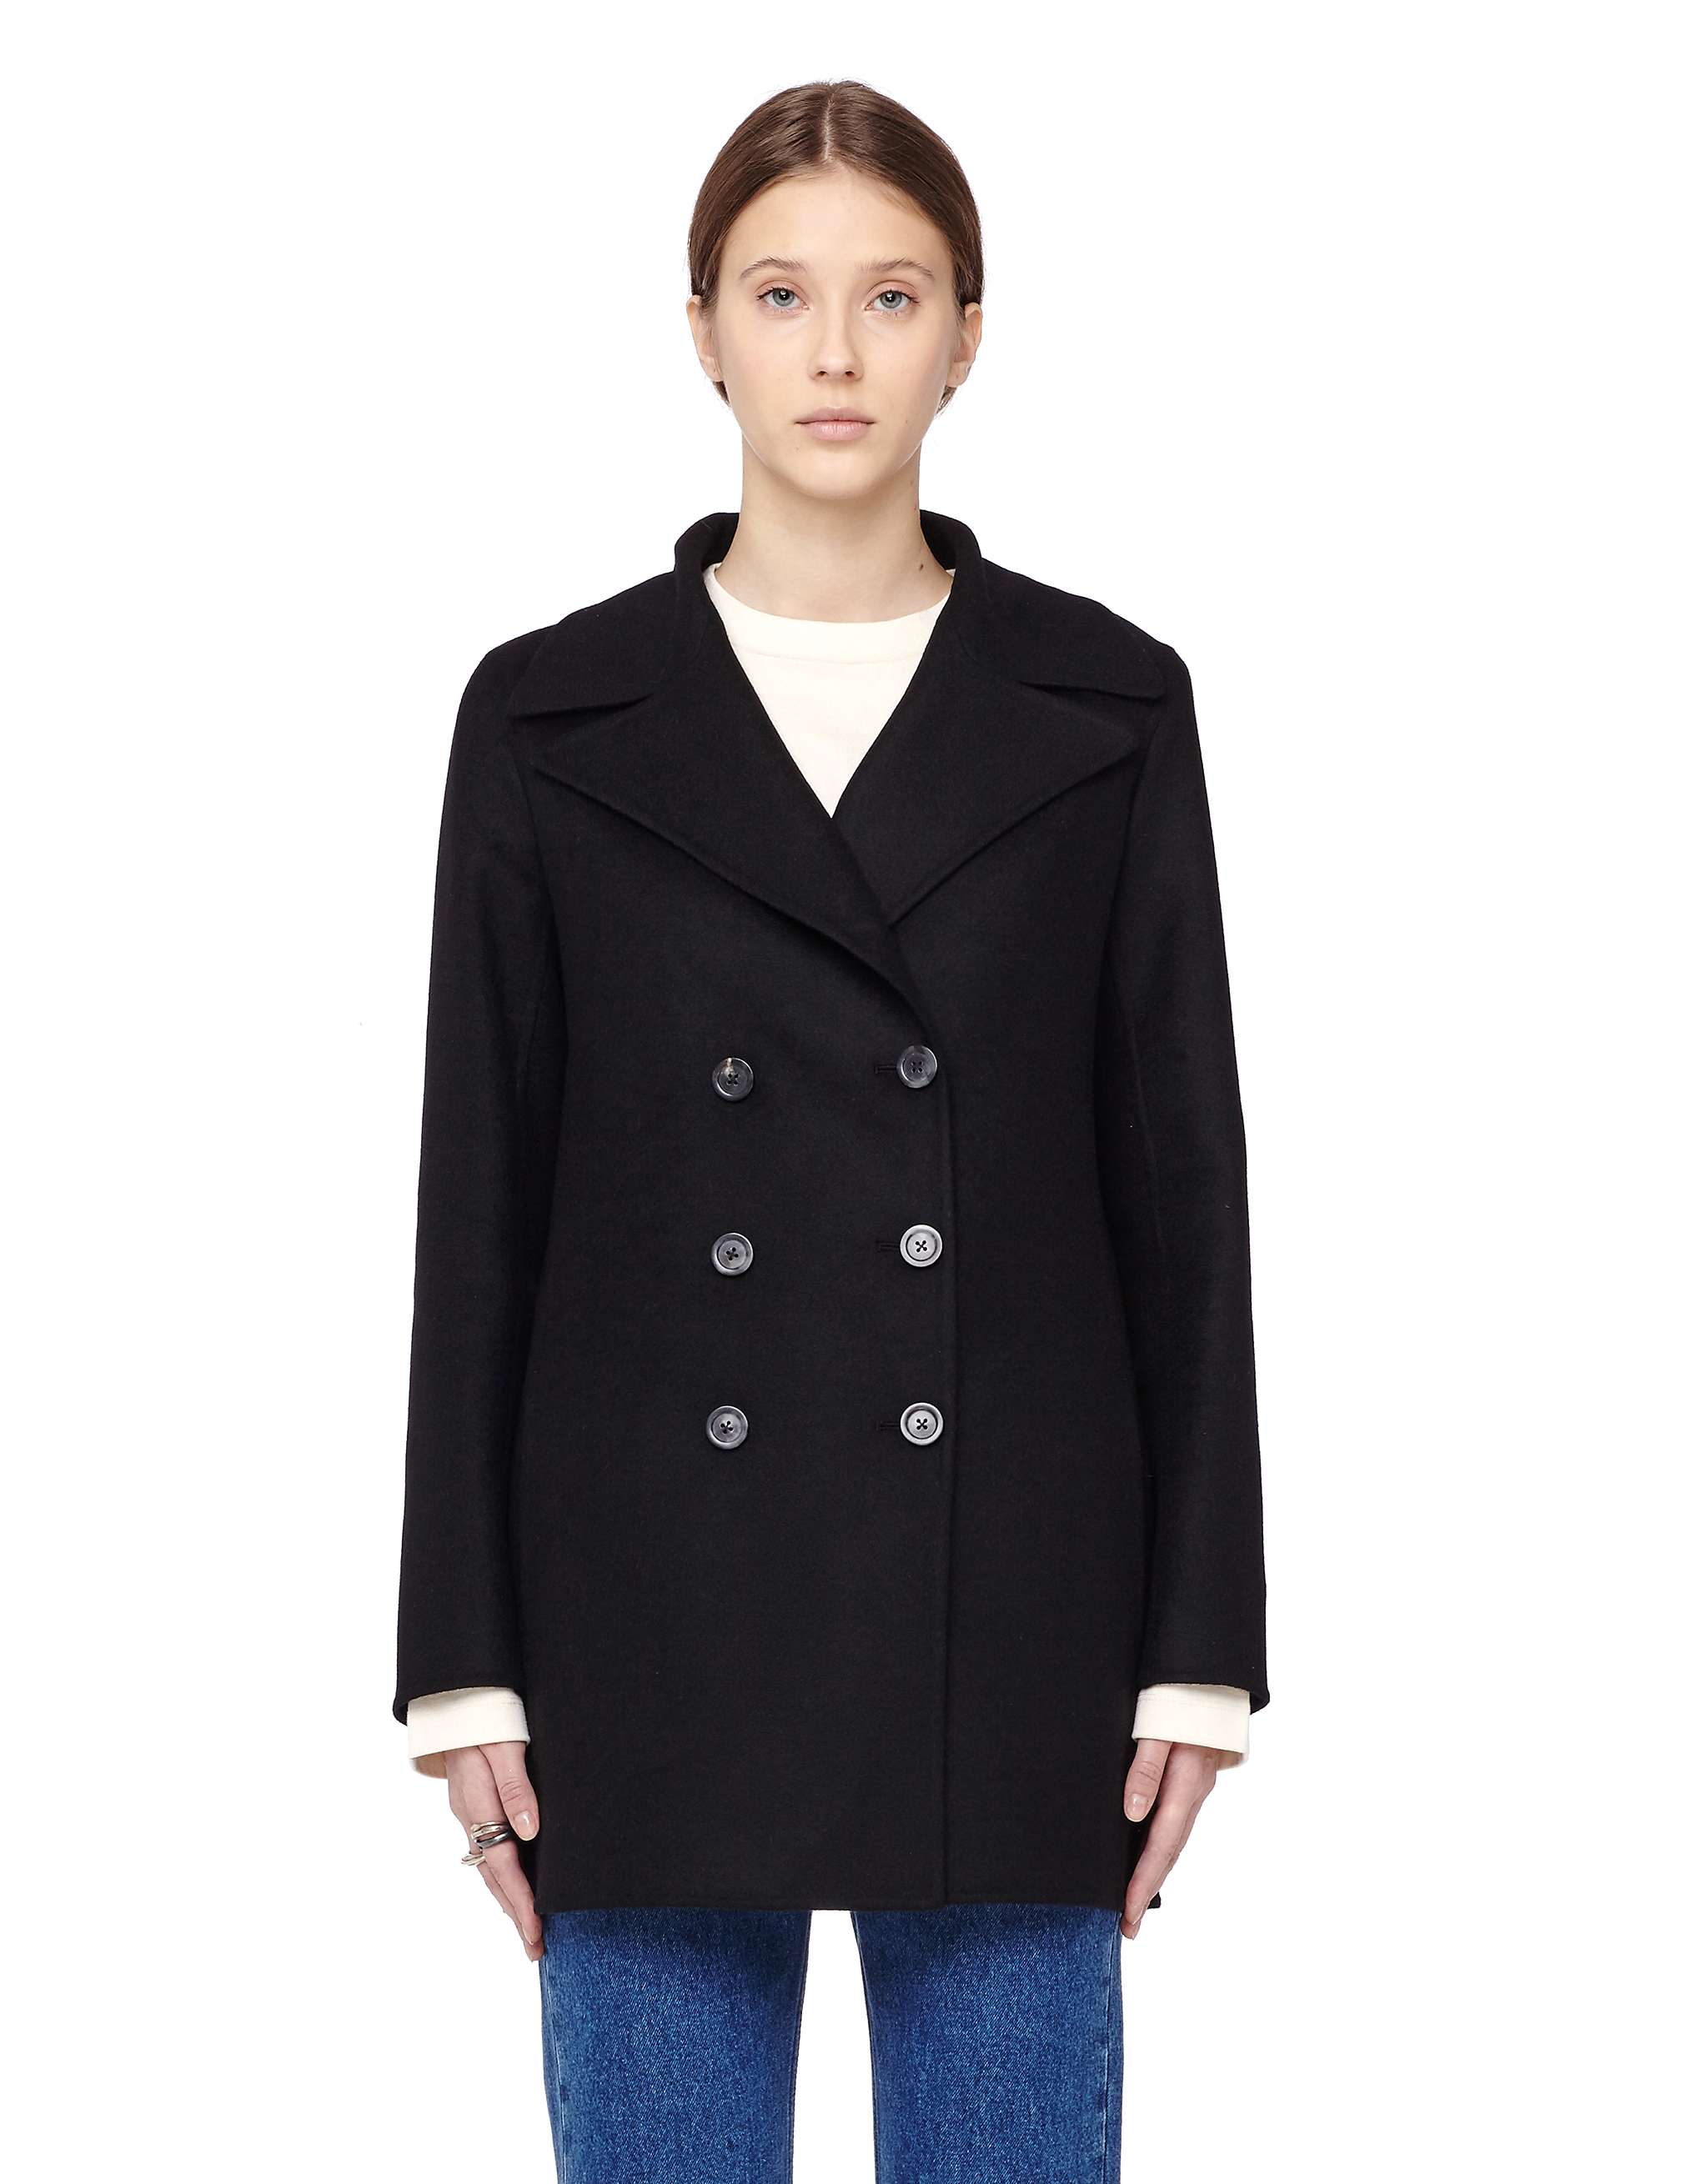 The Row | Zora wool and cashmere peacoat | SVMOSCOW.COM